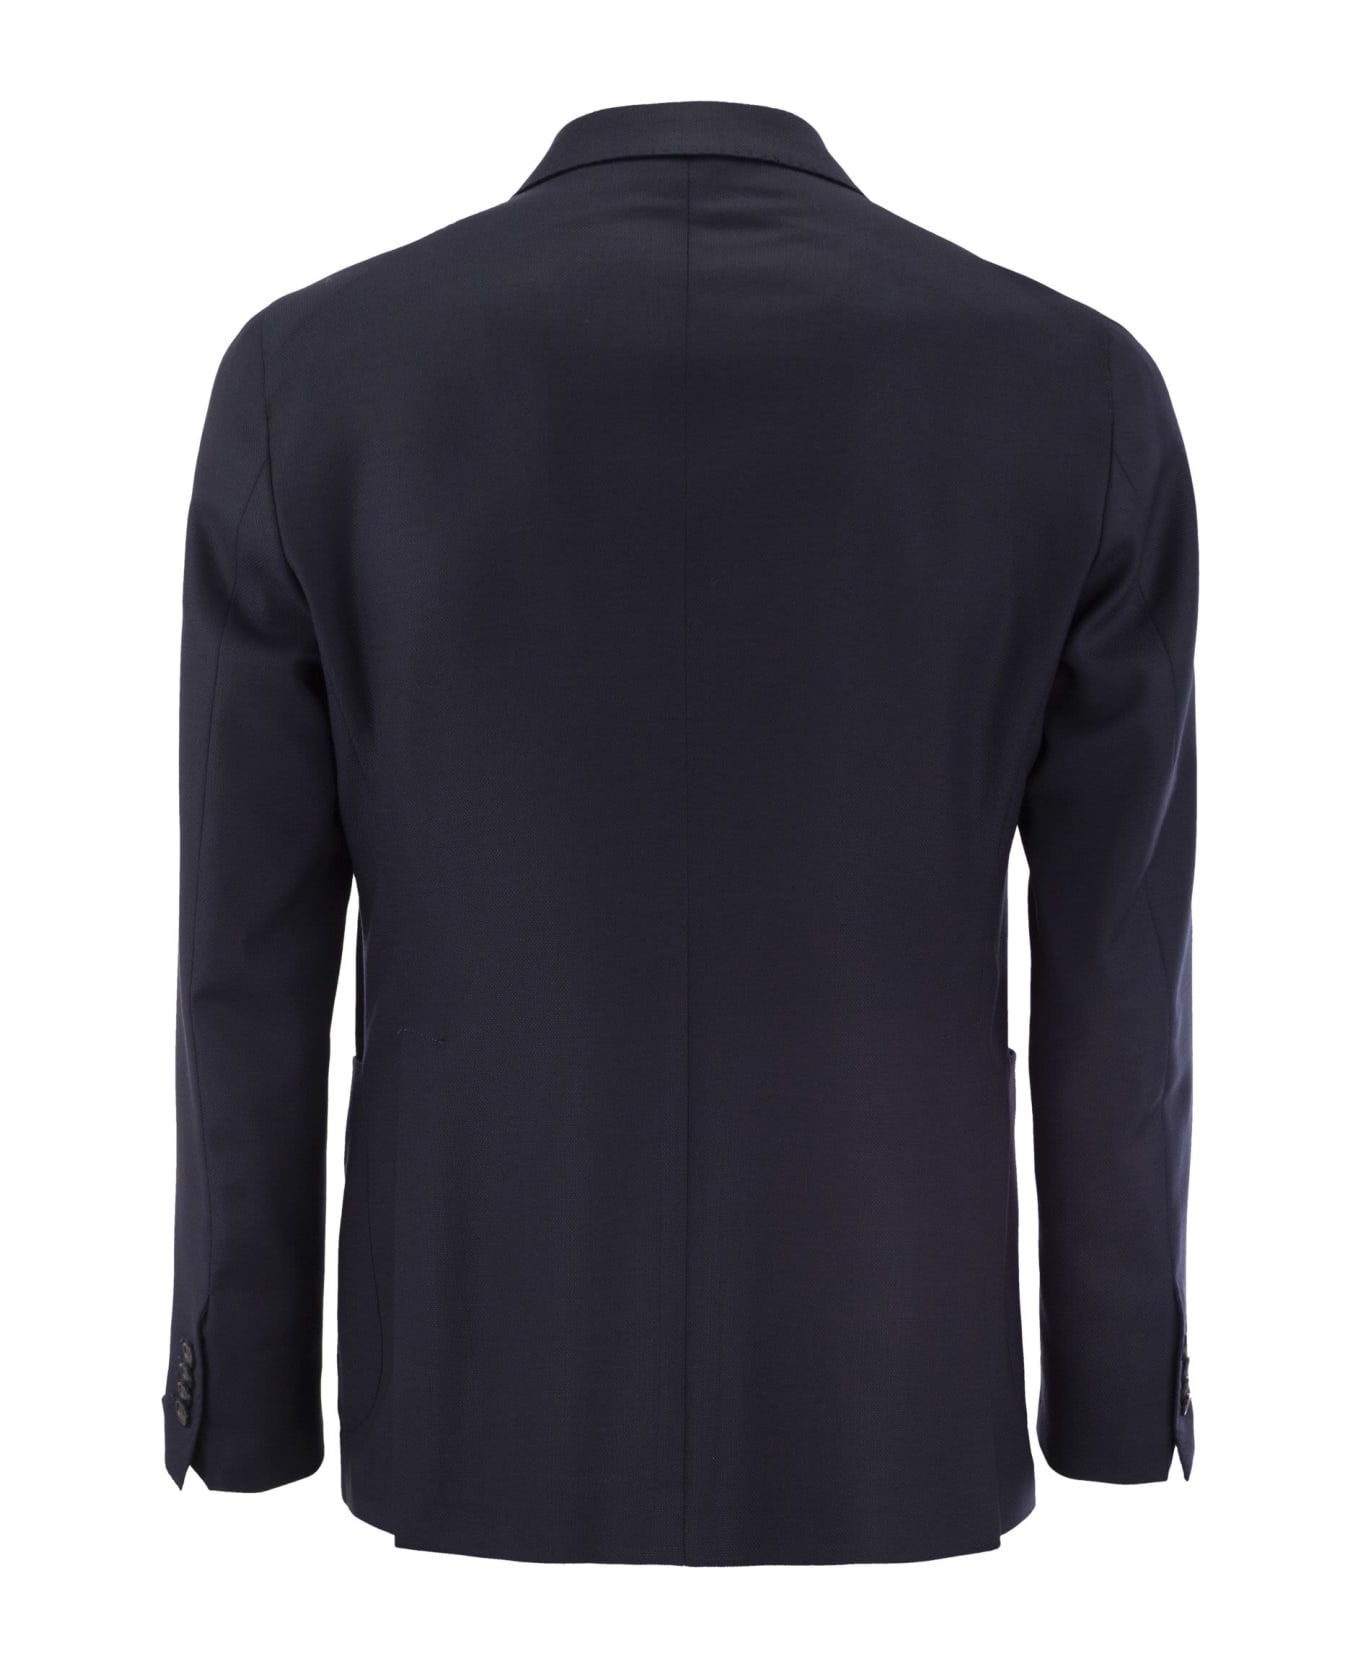 Tagliatore Double-breasted Cashmere Jacket - Blue スーツ